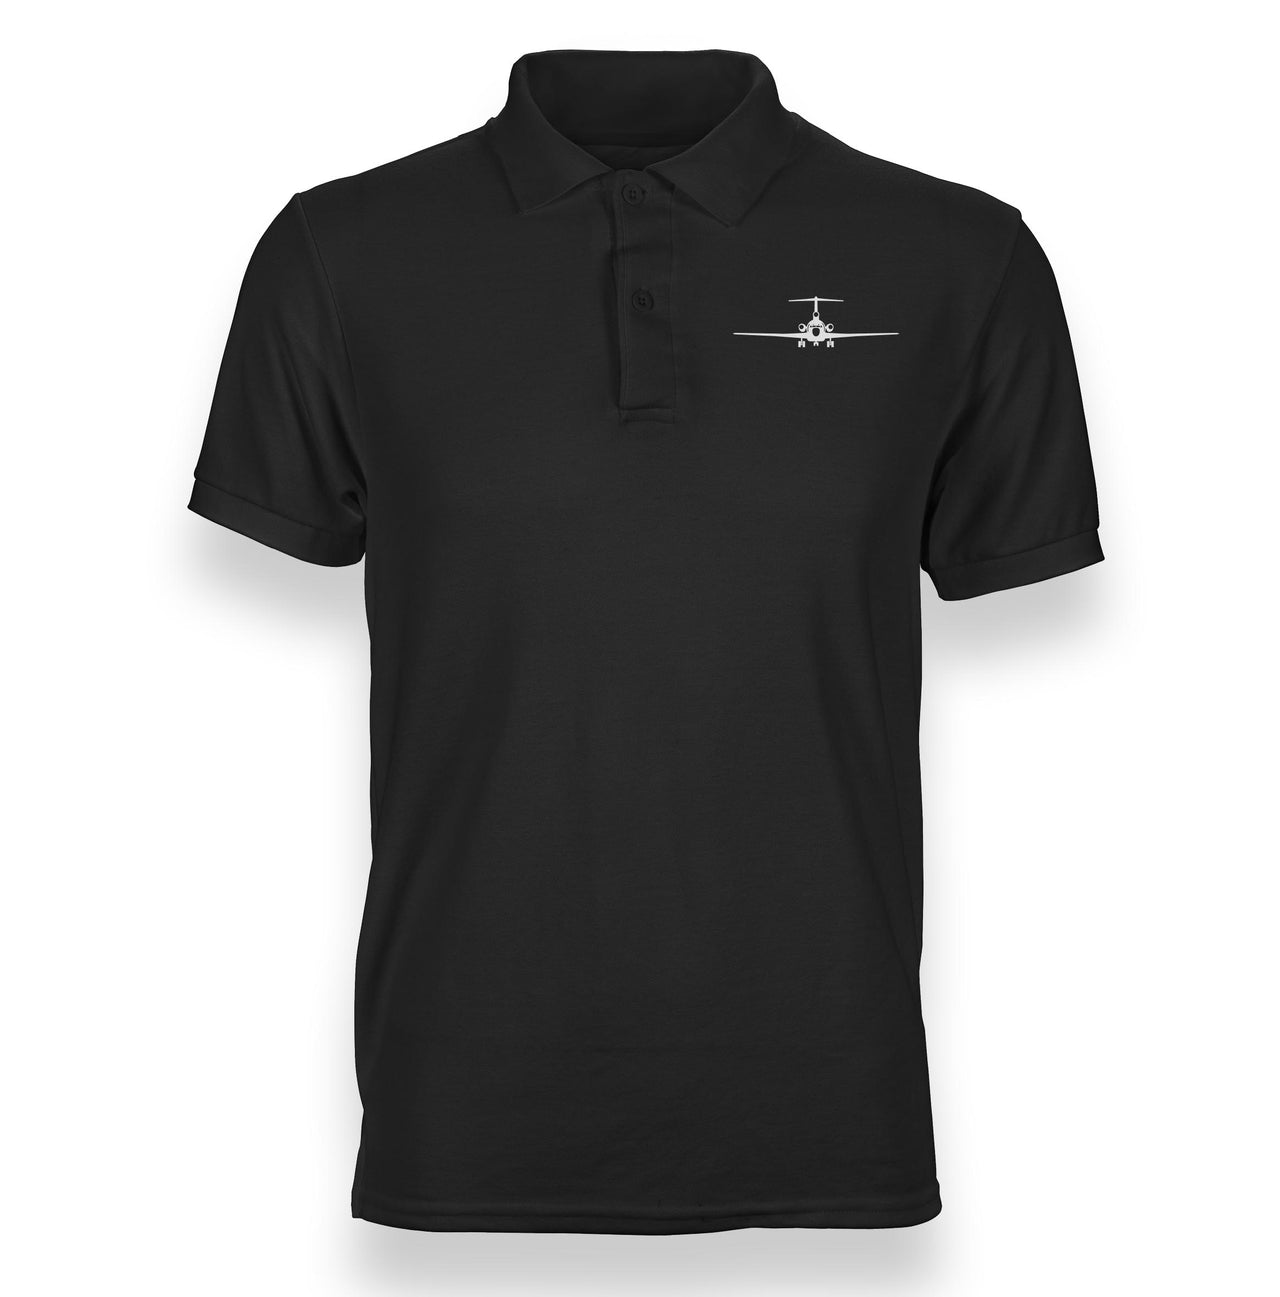 Boeing 727 Silhouette Designed Polo T-Shirts